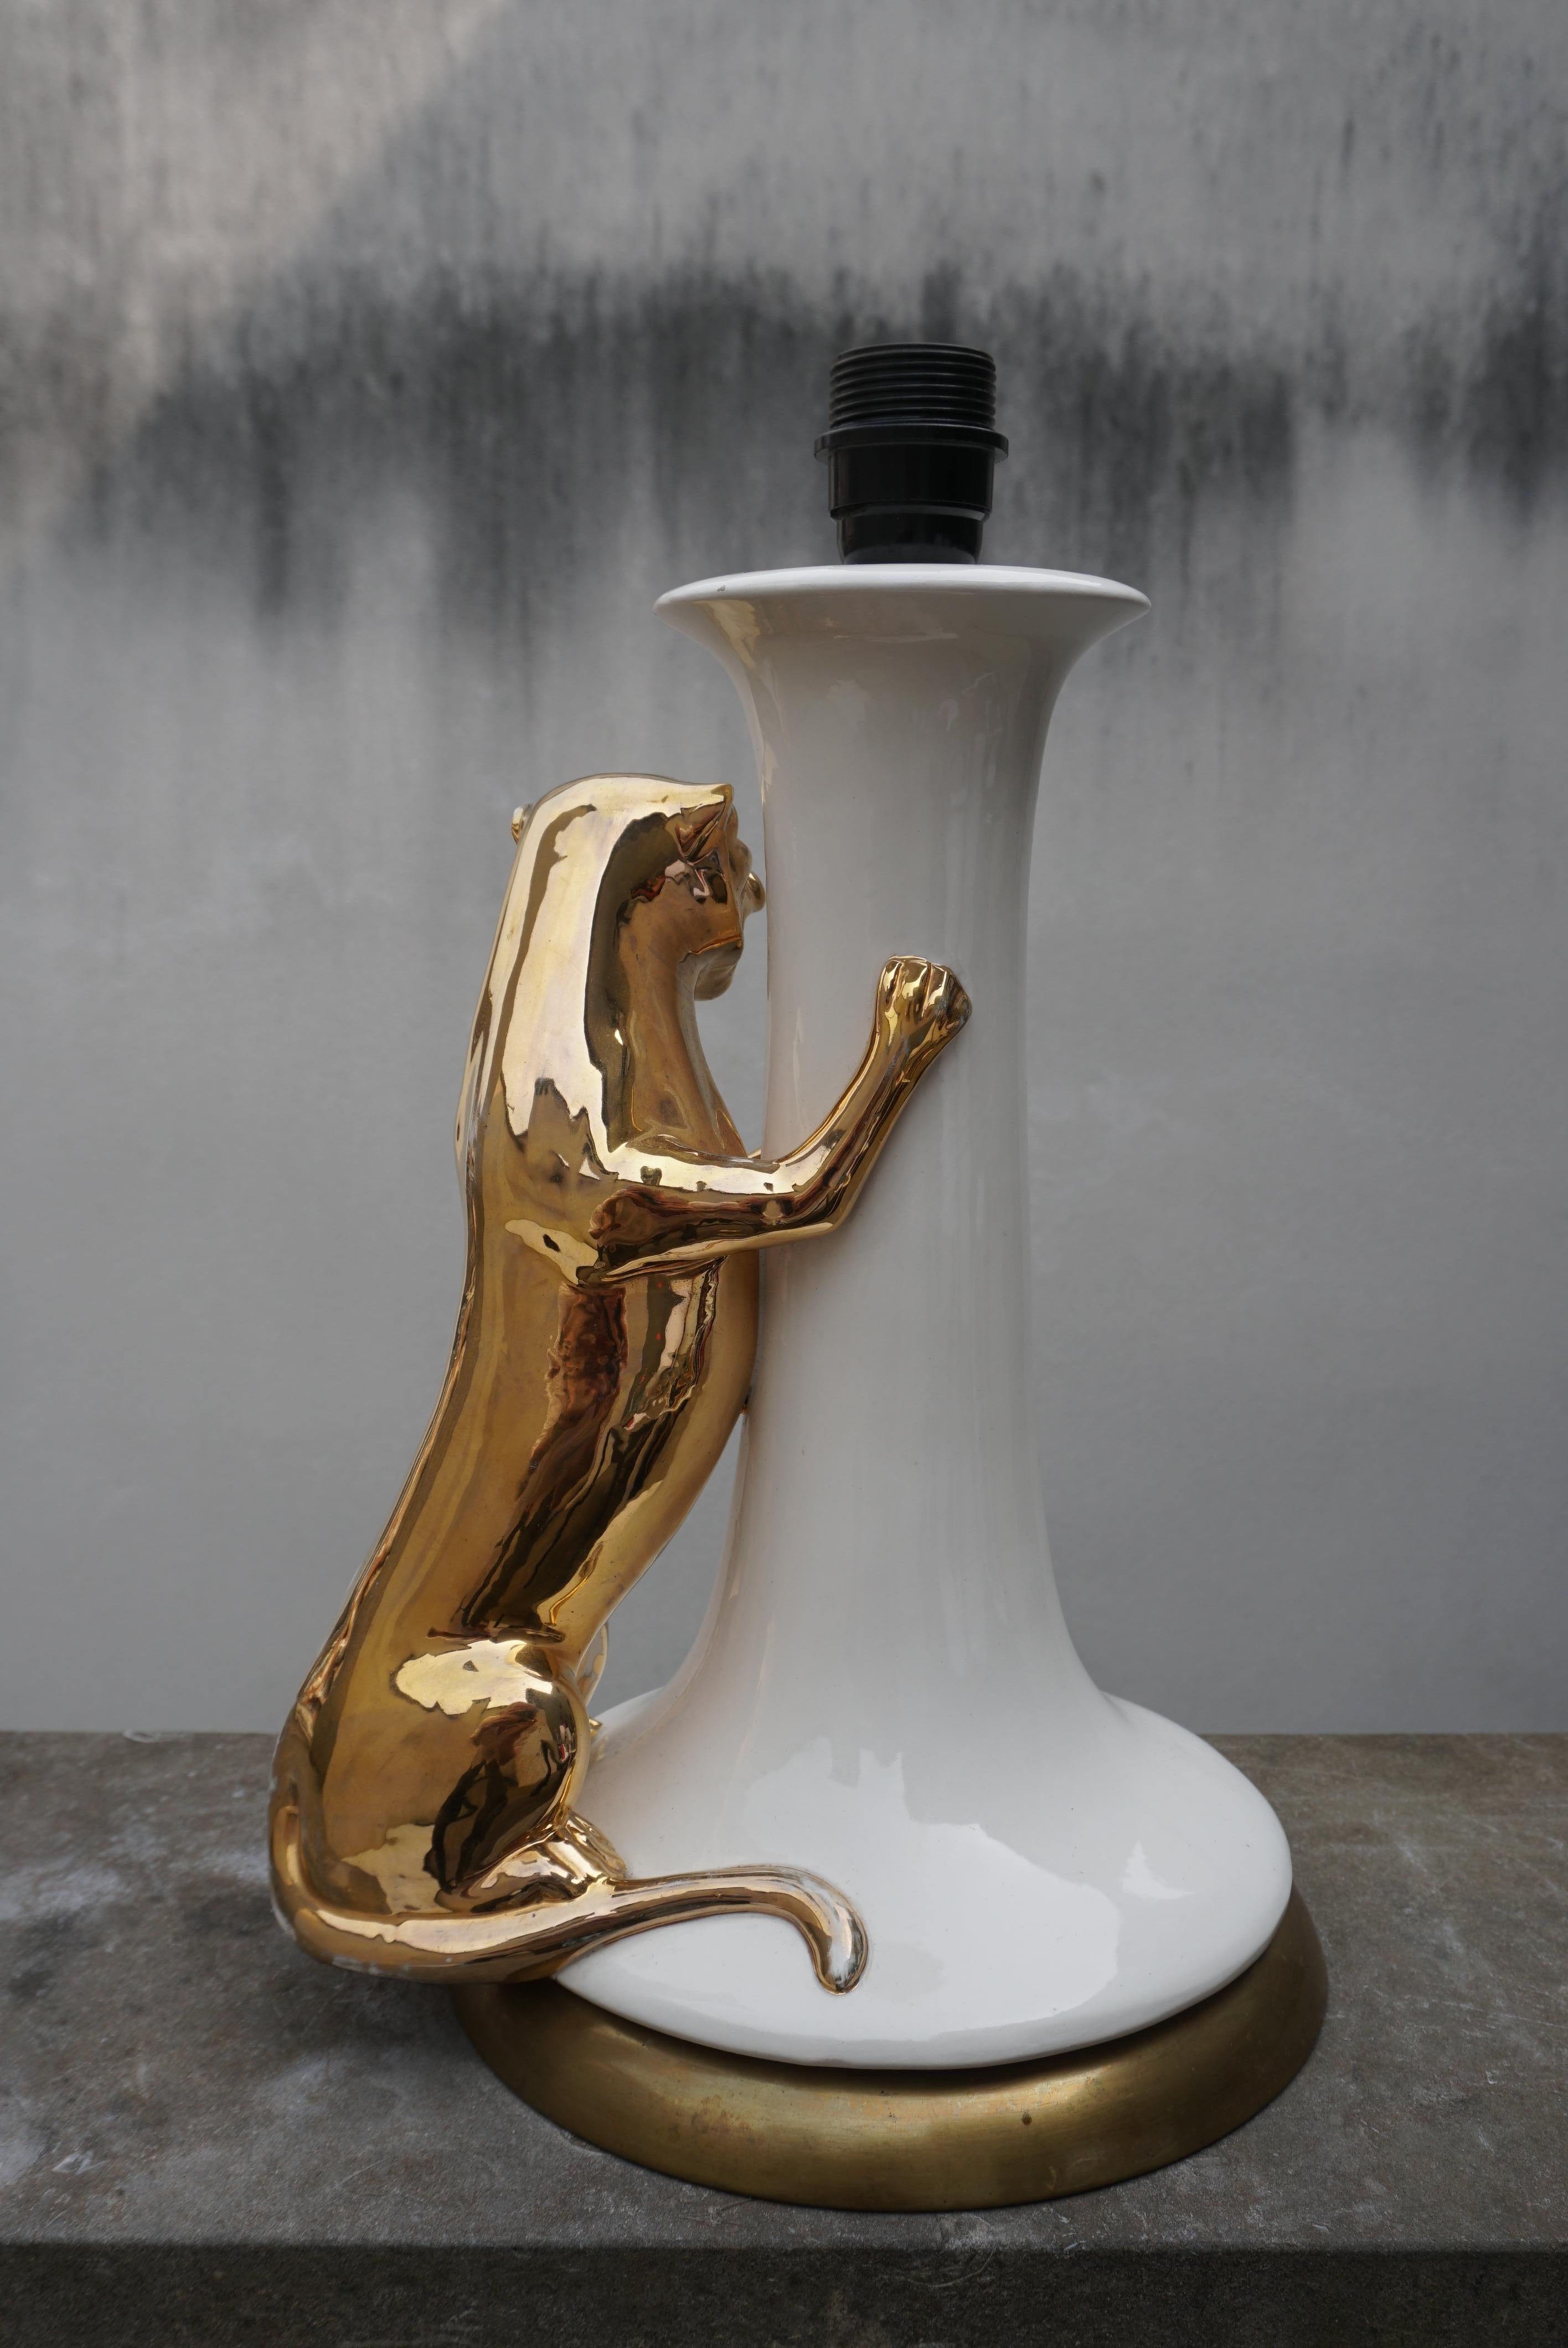 Italian Midcentury Table Lamp with Ceramic Gilt Panther, 1970s For Sale 6